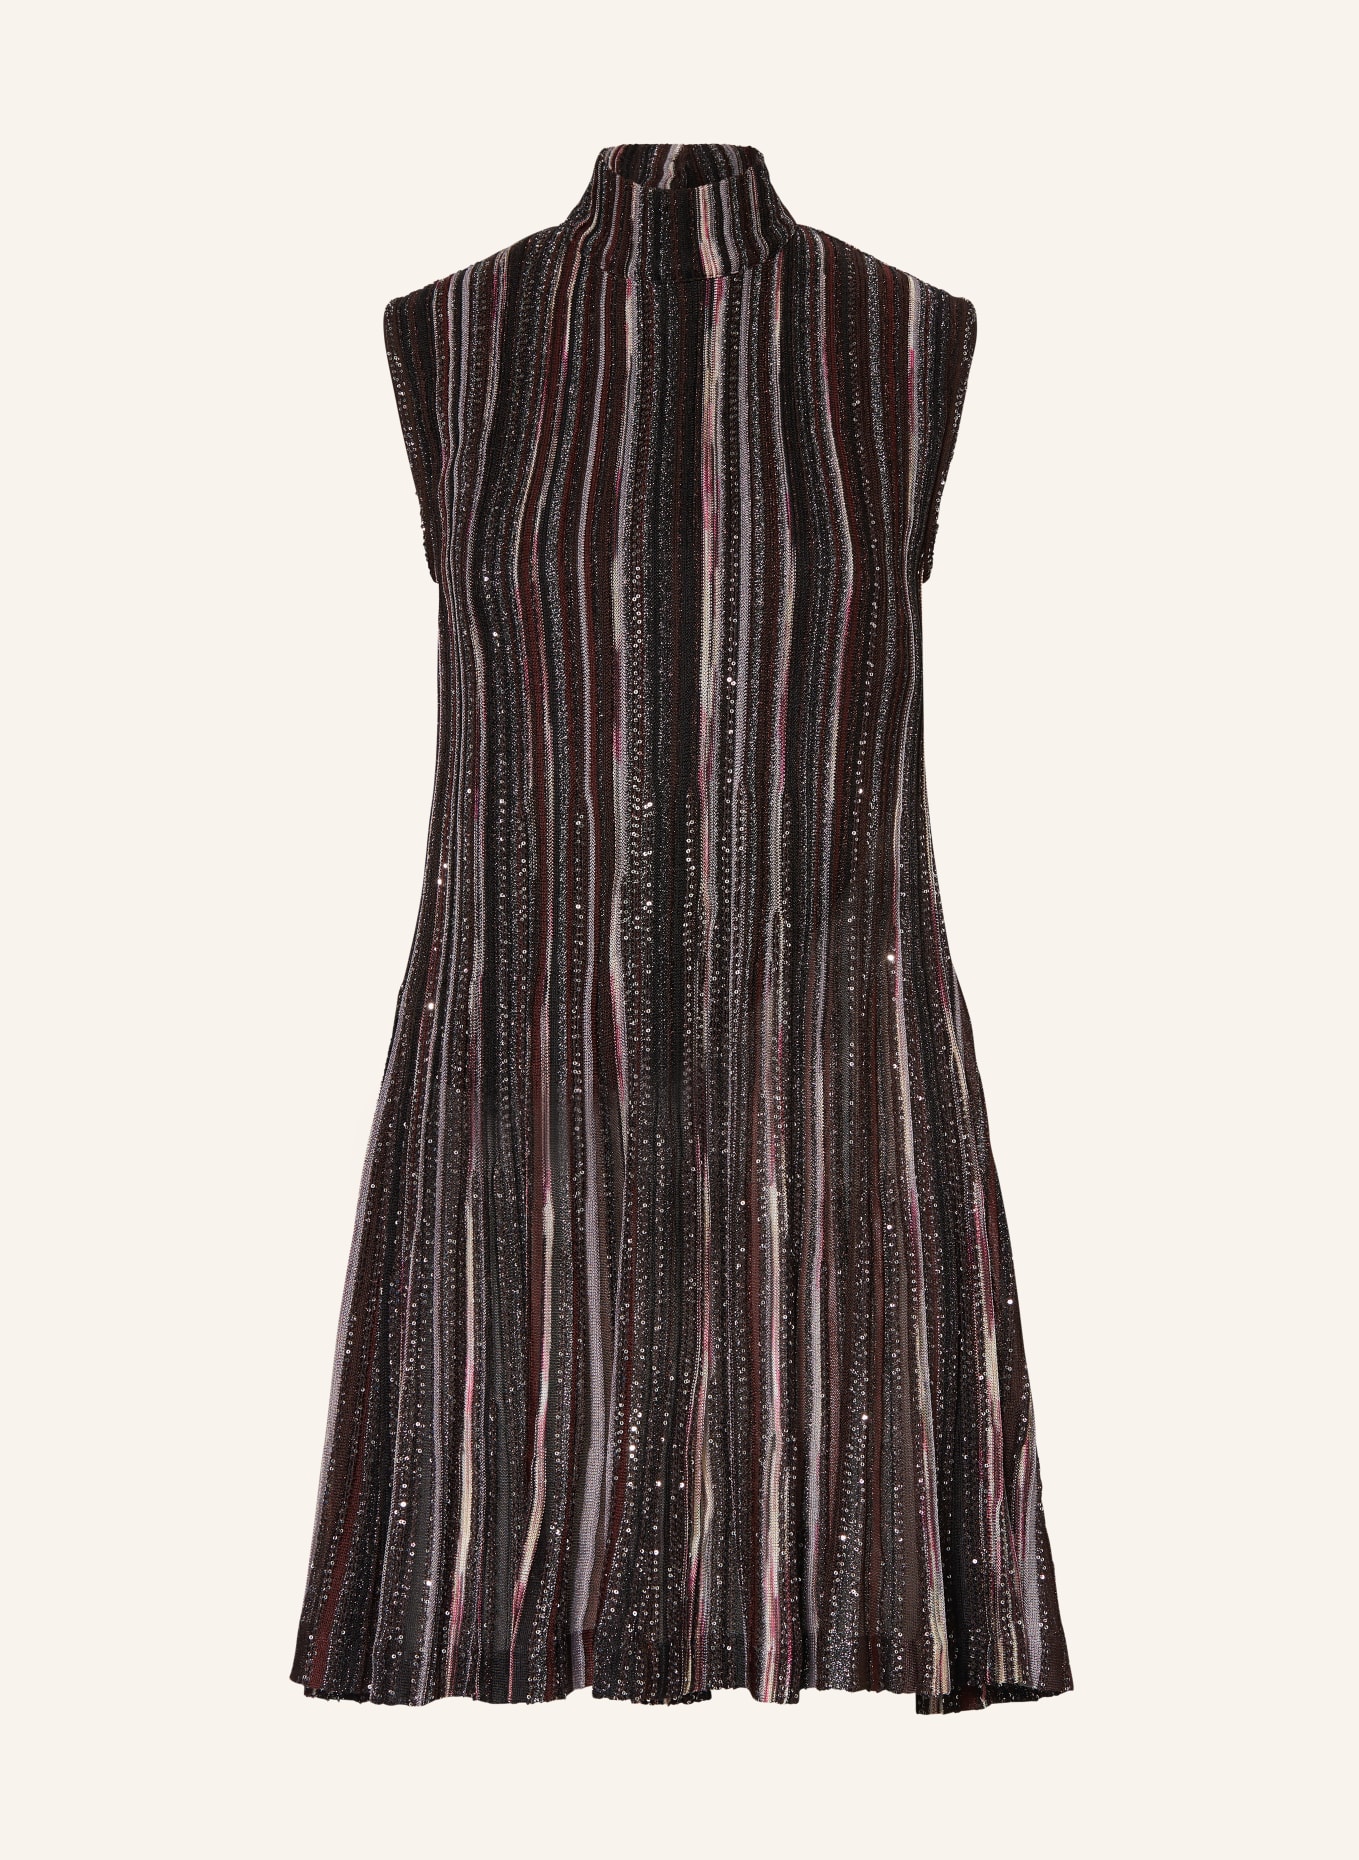 MISSONI Dress with glitter thread and sequins, Color: DARK RED/ DARK BROWN/ BEIGE (Image 1)